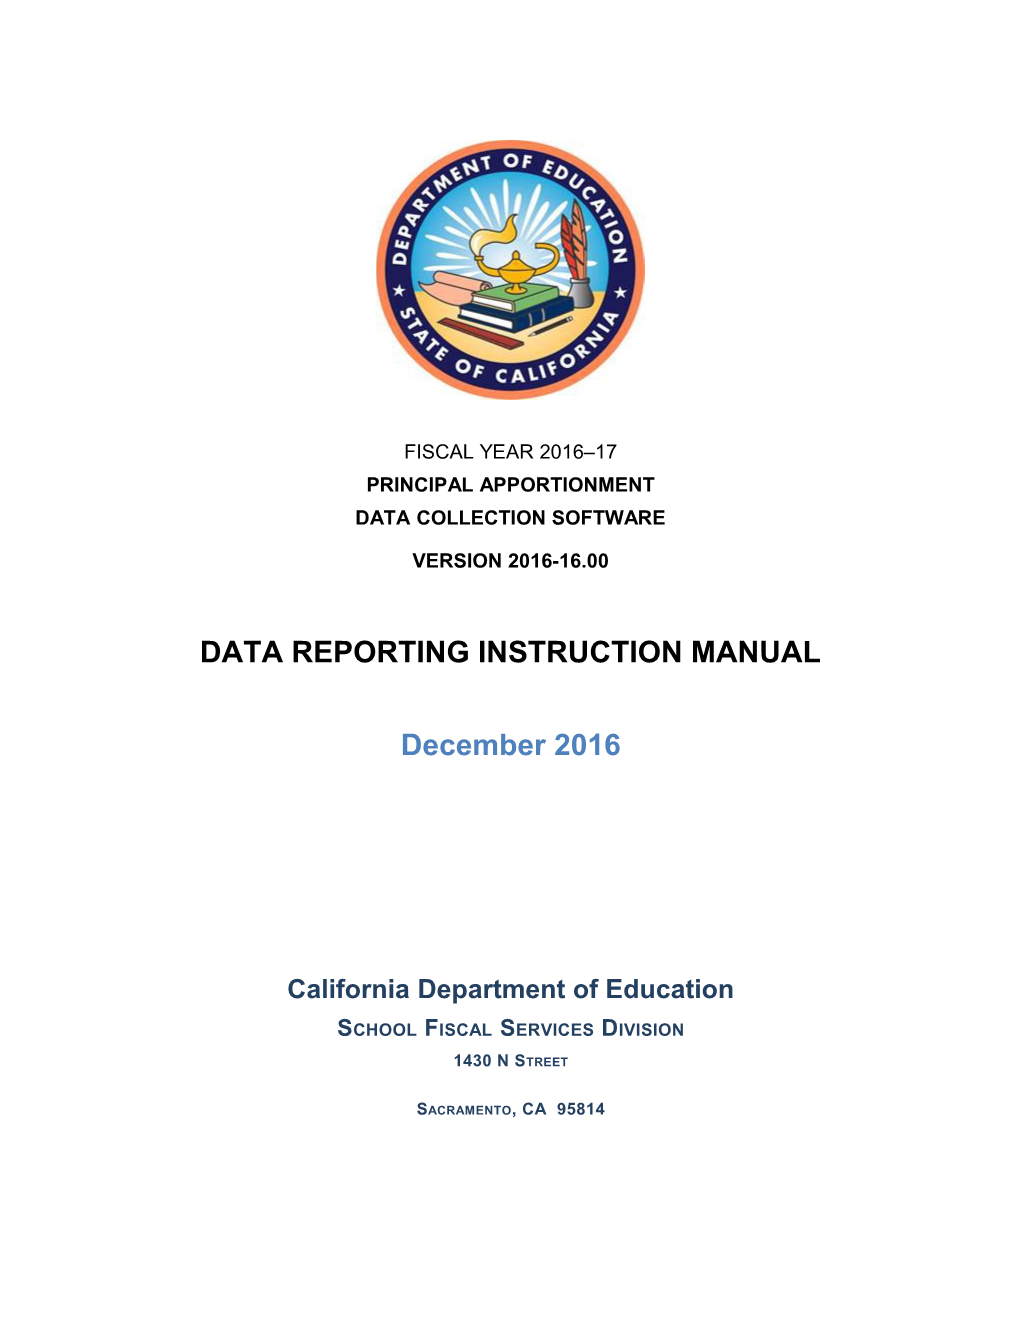 Data Reporting Instruction Manual, FY 2016-17 - Principal Apportionment (CA Dept of Education)